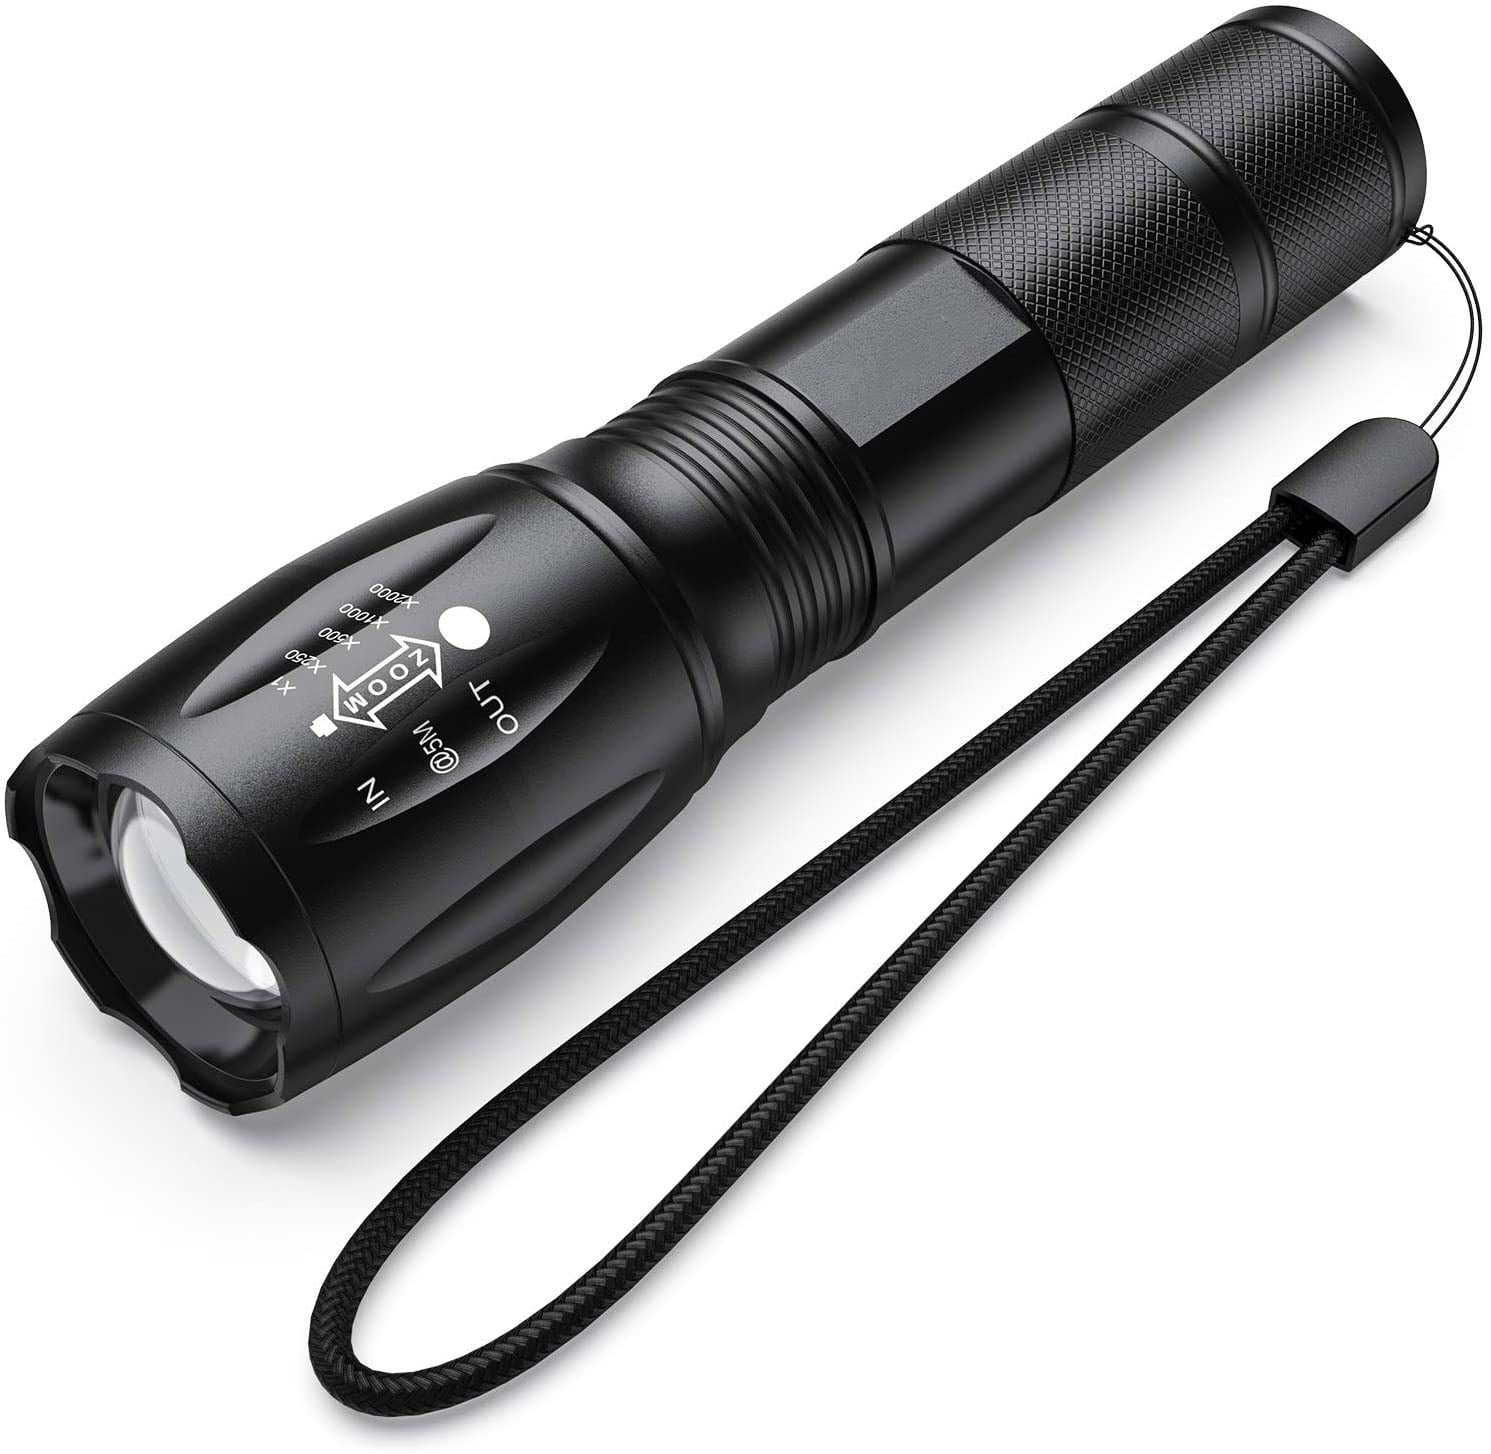 US Tactical 2200 Lumen Zoomable T6 LED Flashlight Focus Torch Zoom Lamp Light MX 